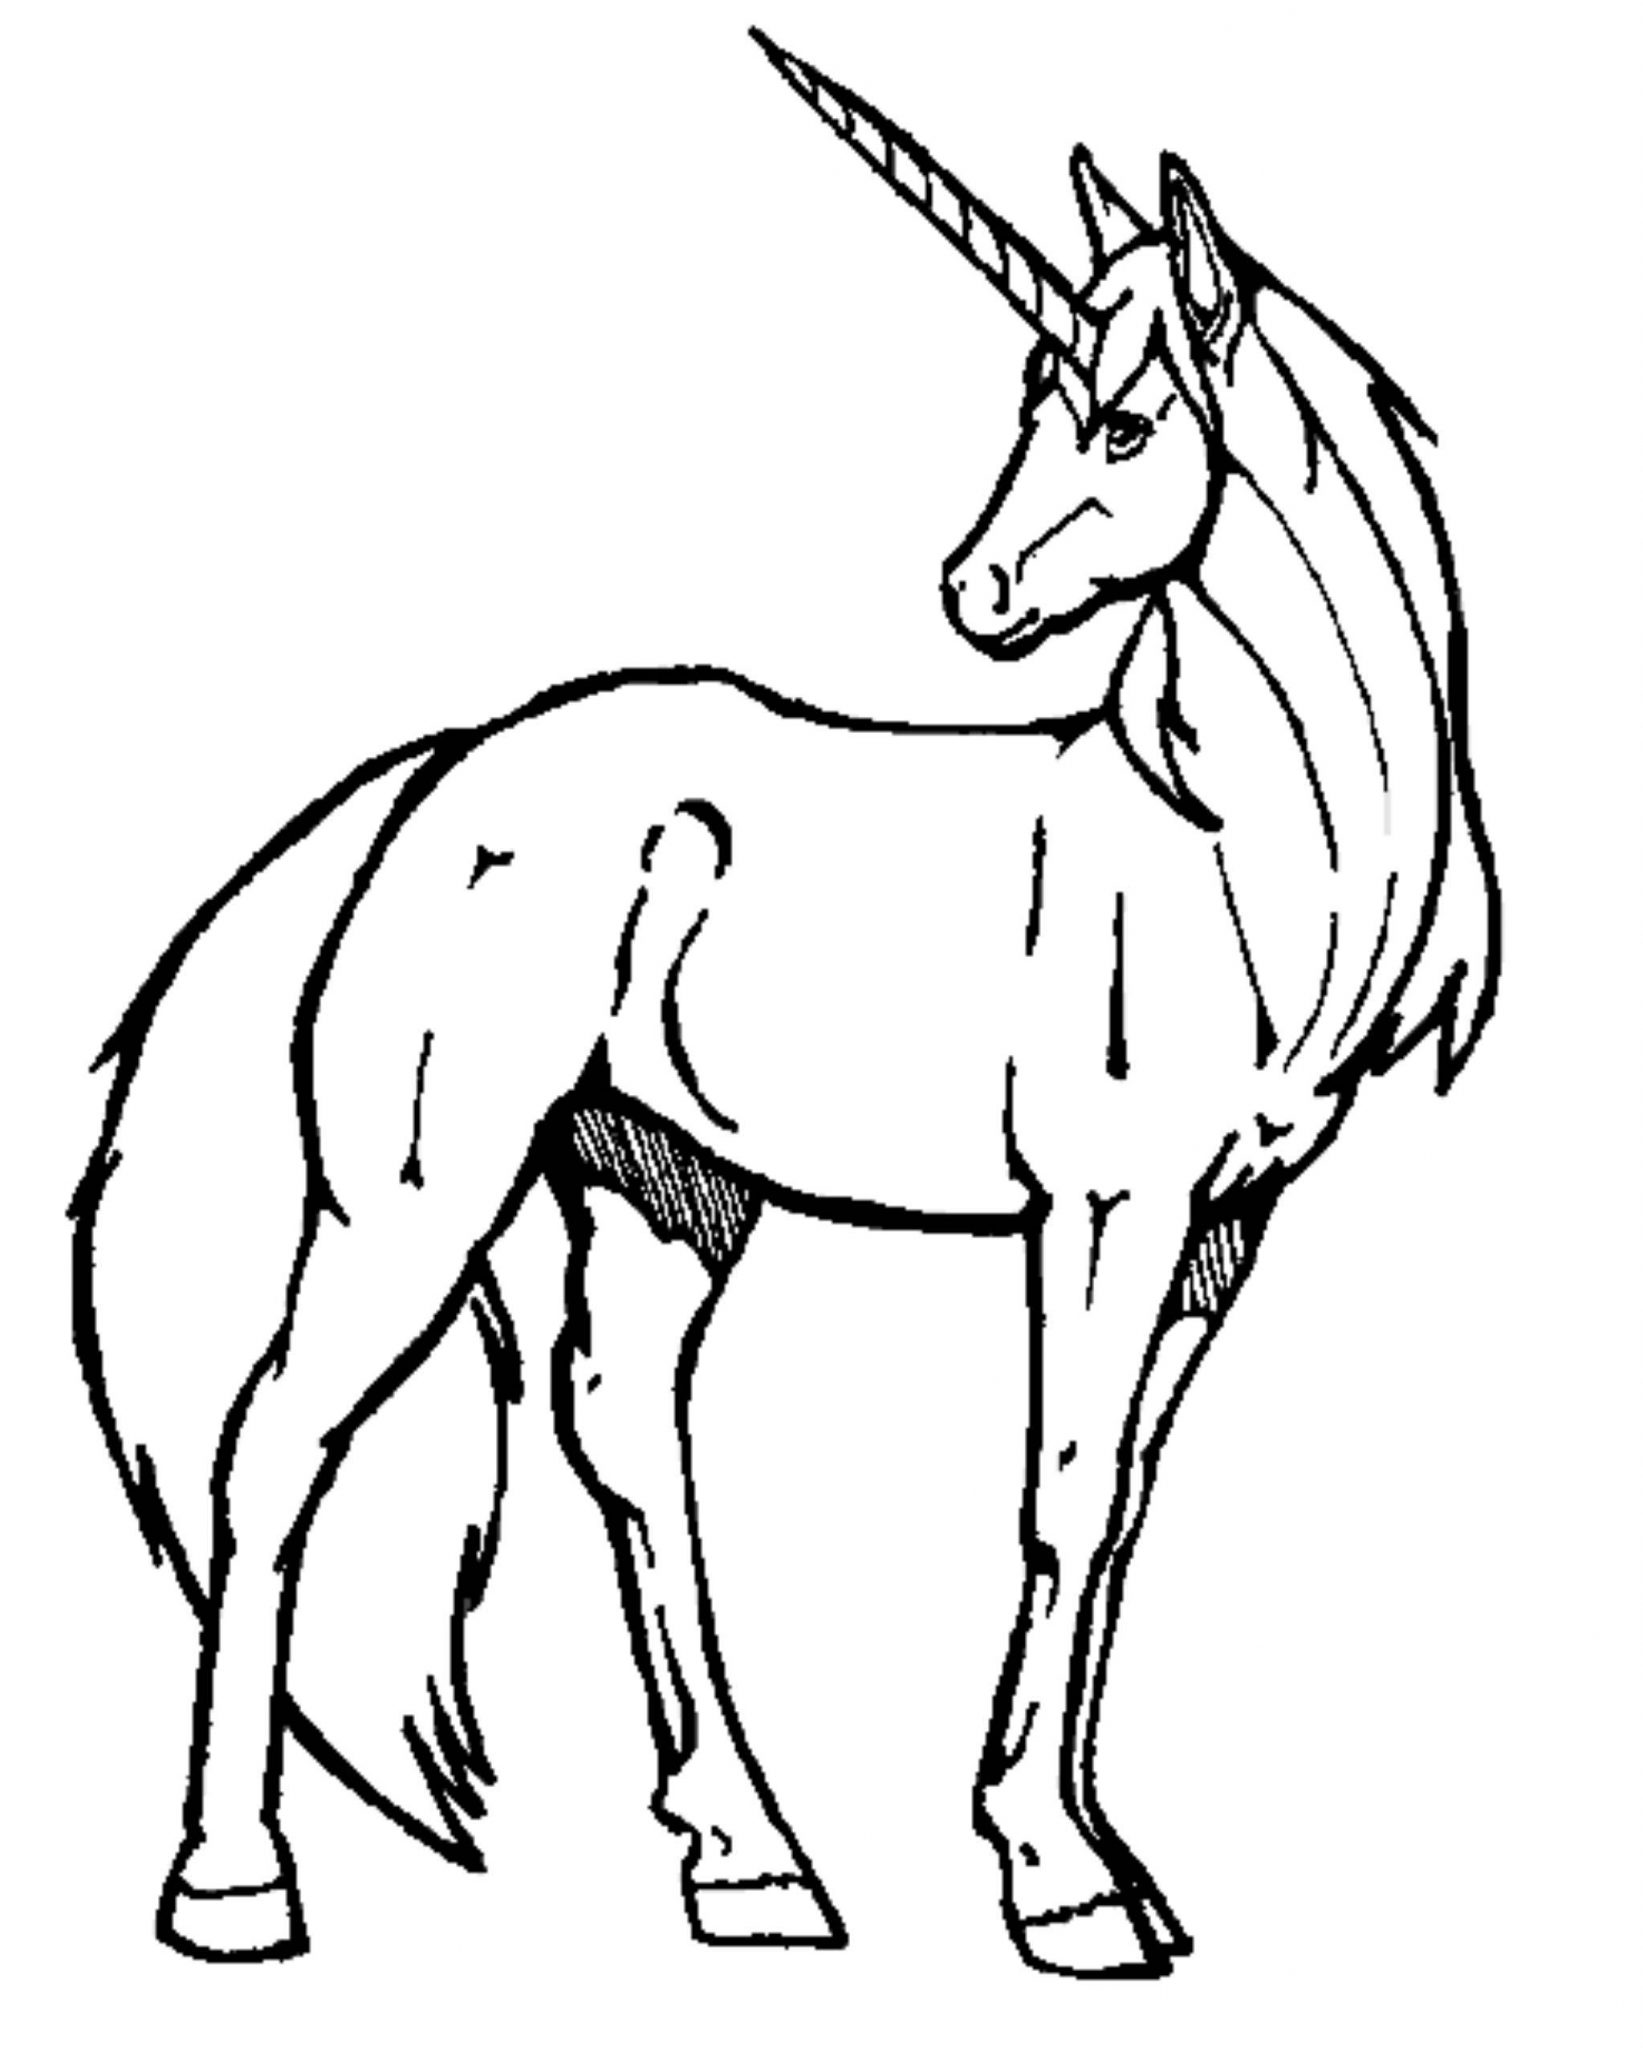 print-download-unicorn-coloring-pages-for-children